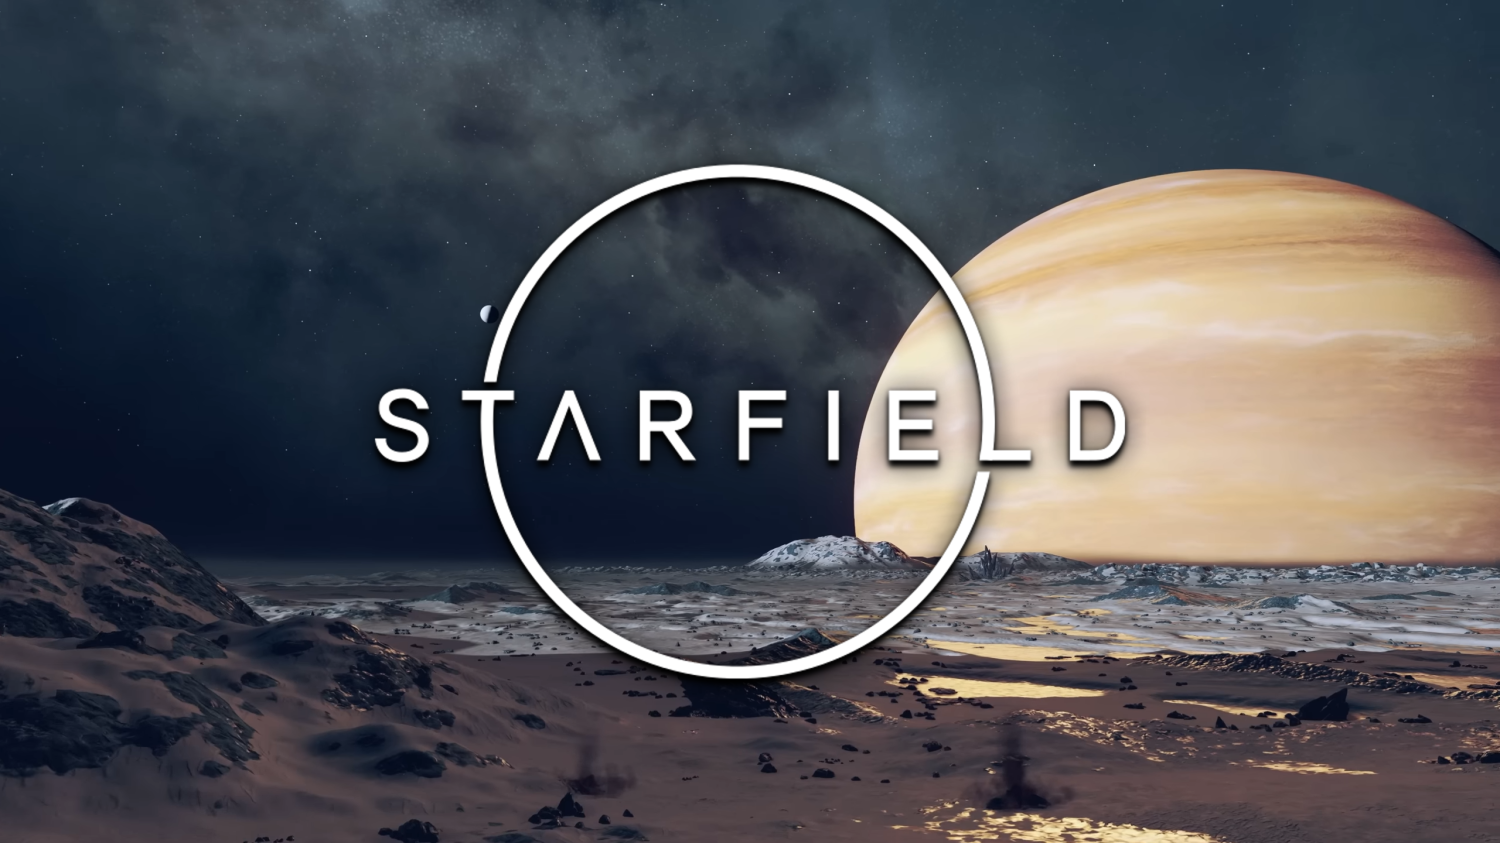 With Starfield delayed, 2022 is the ultimate test for Xbox